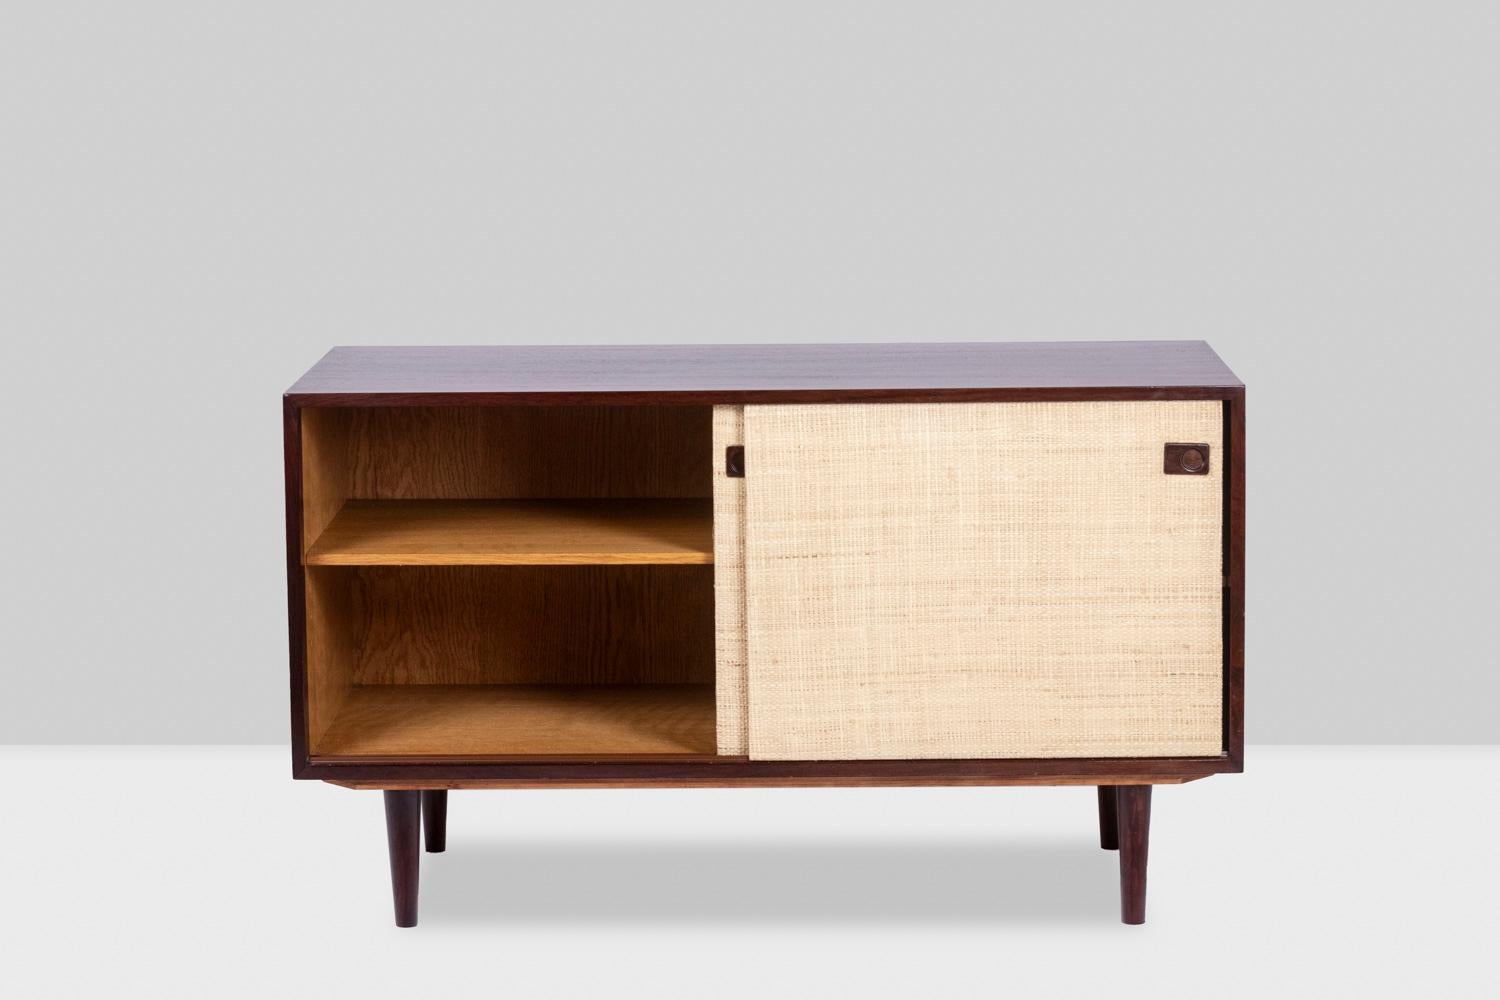 Rosewood Sideboard in rosewood, 1970s For Sale